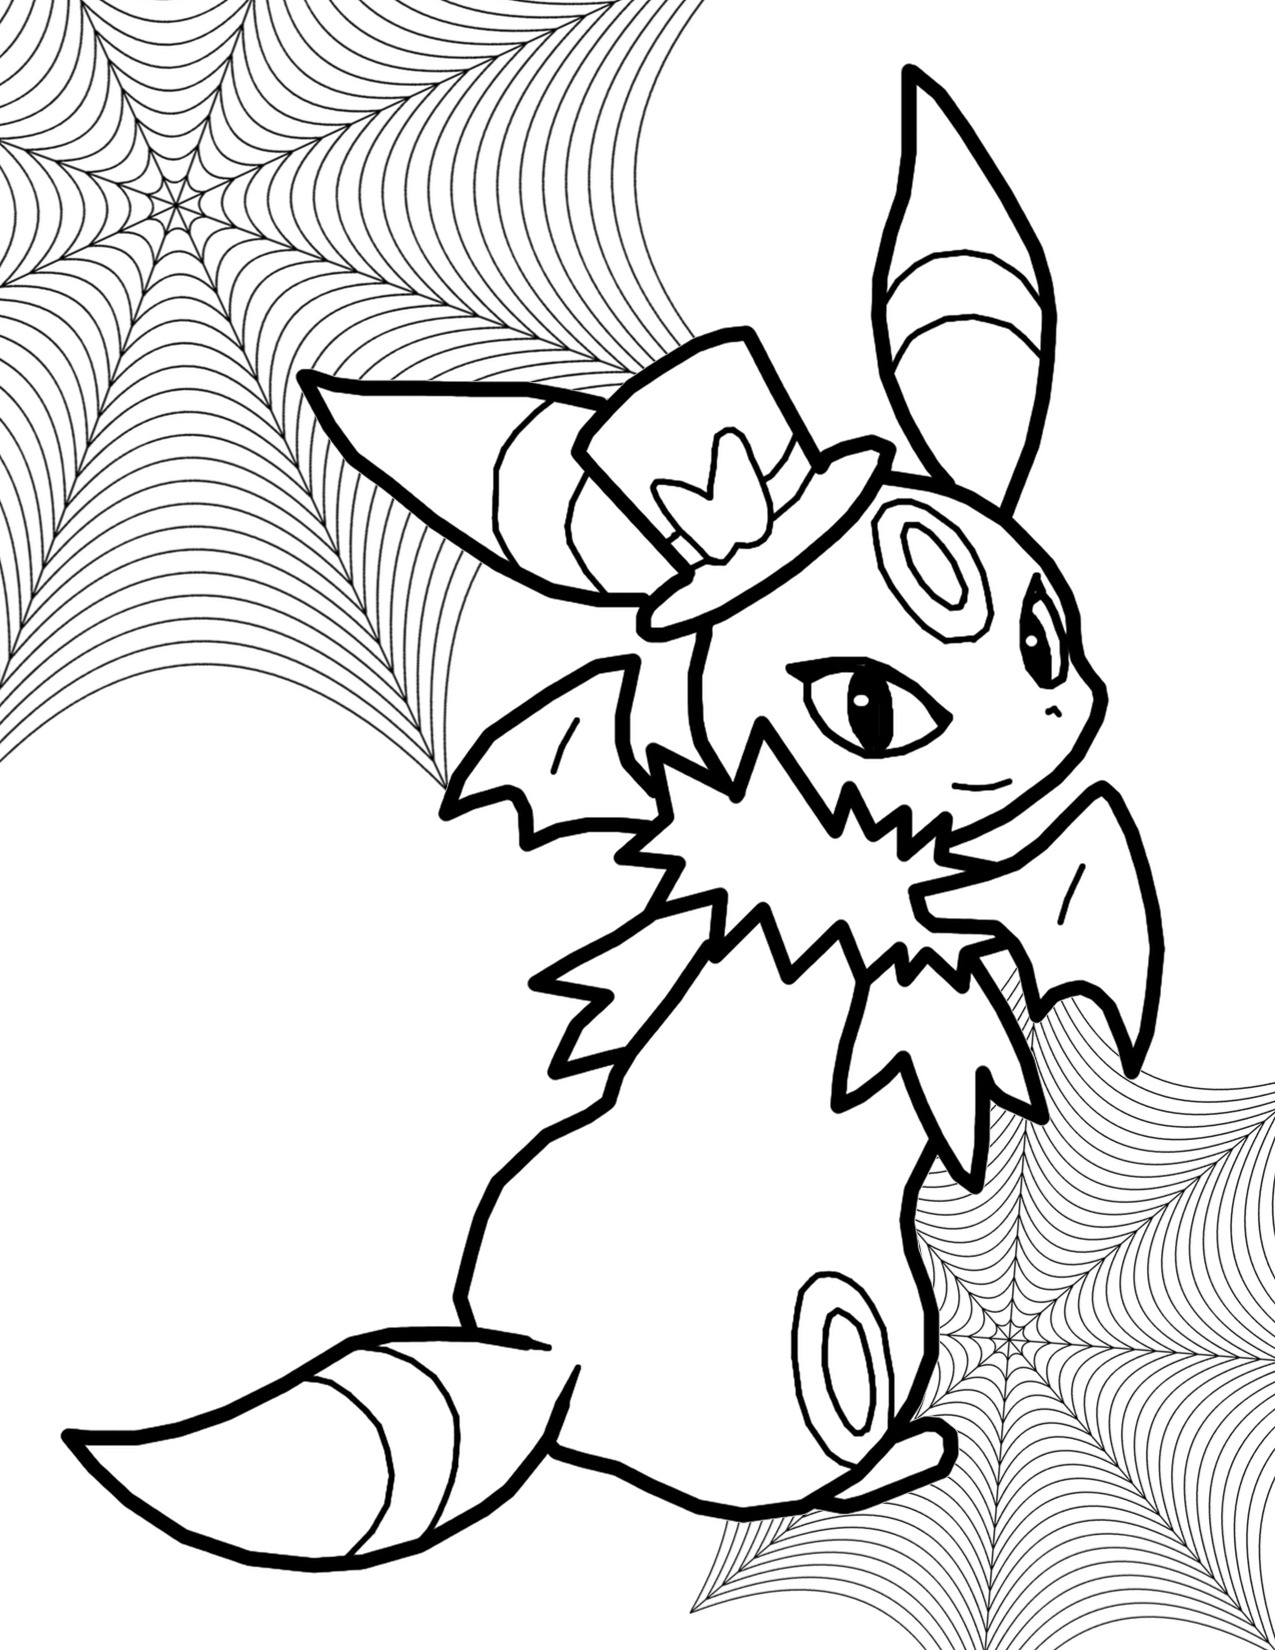 Download ColorMon • Here is the last of the Halloween coloring pages I...